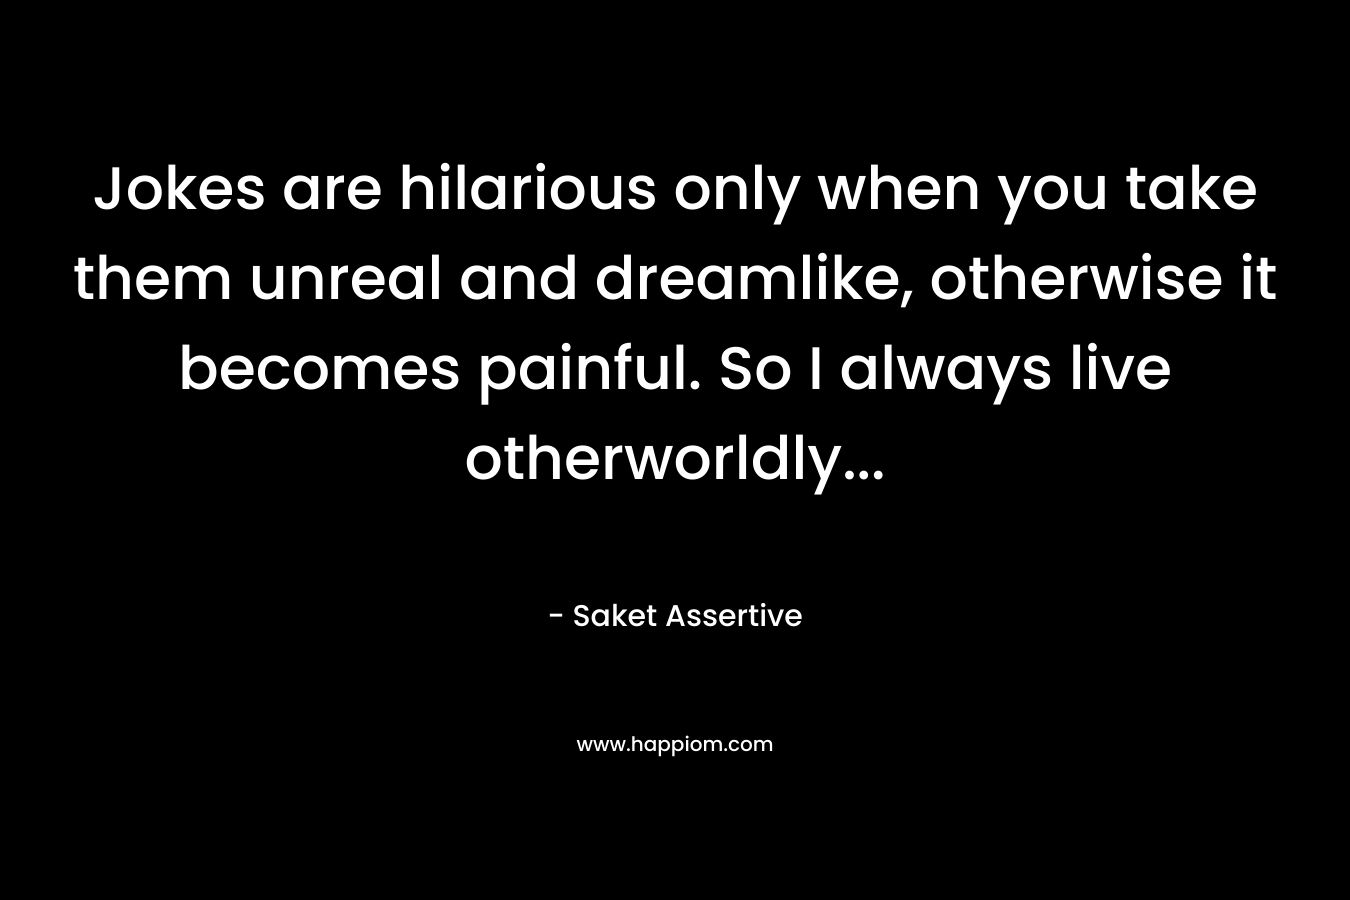 Jokes are hilarious only when you take them unreal and dreamlike, otherwise it becomes painful. So I always live otherworldly...